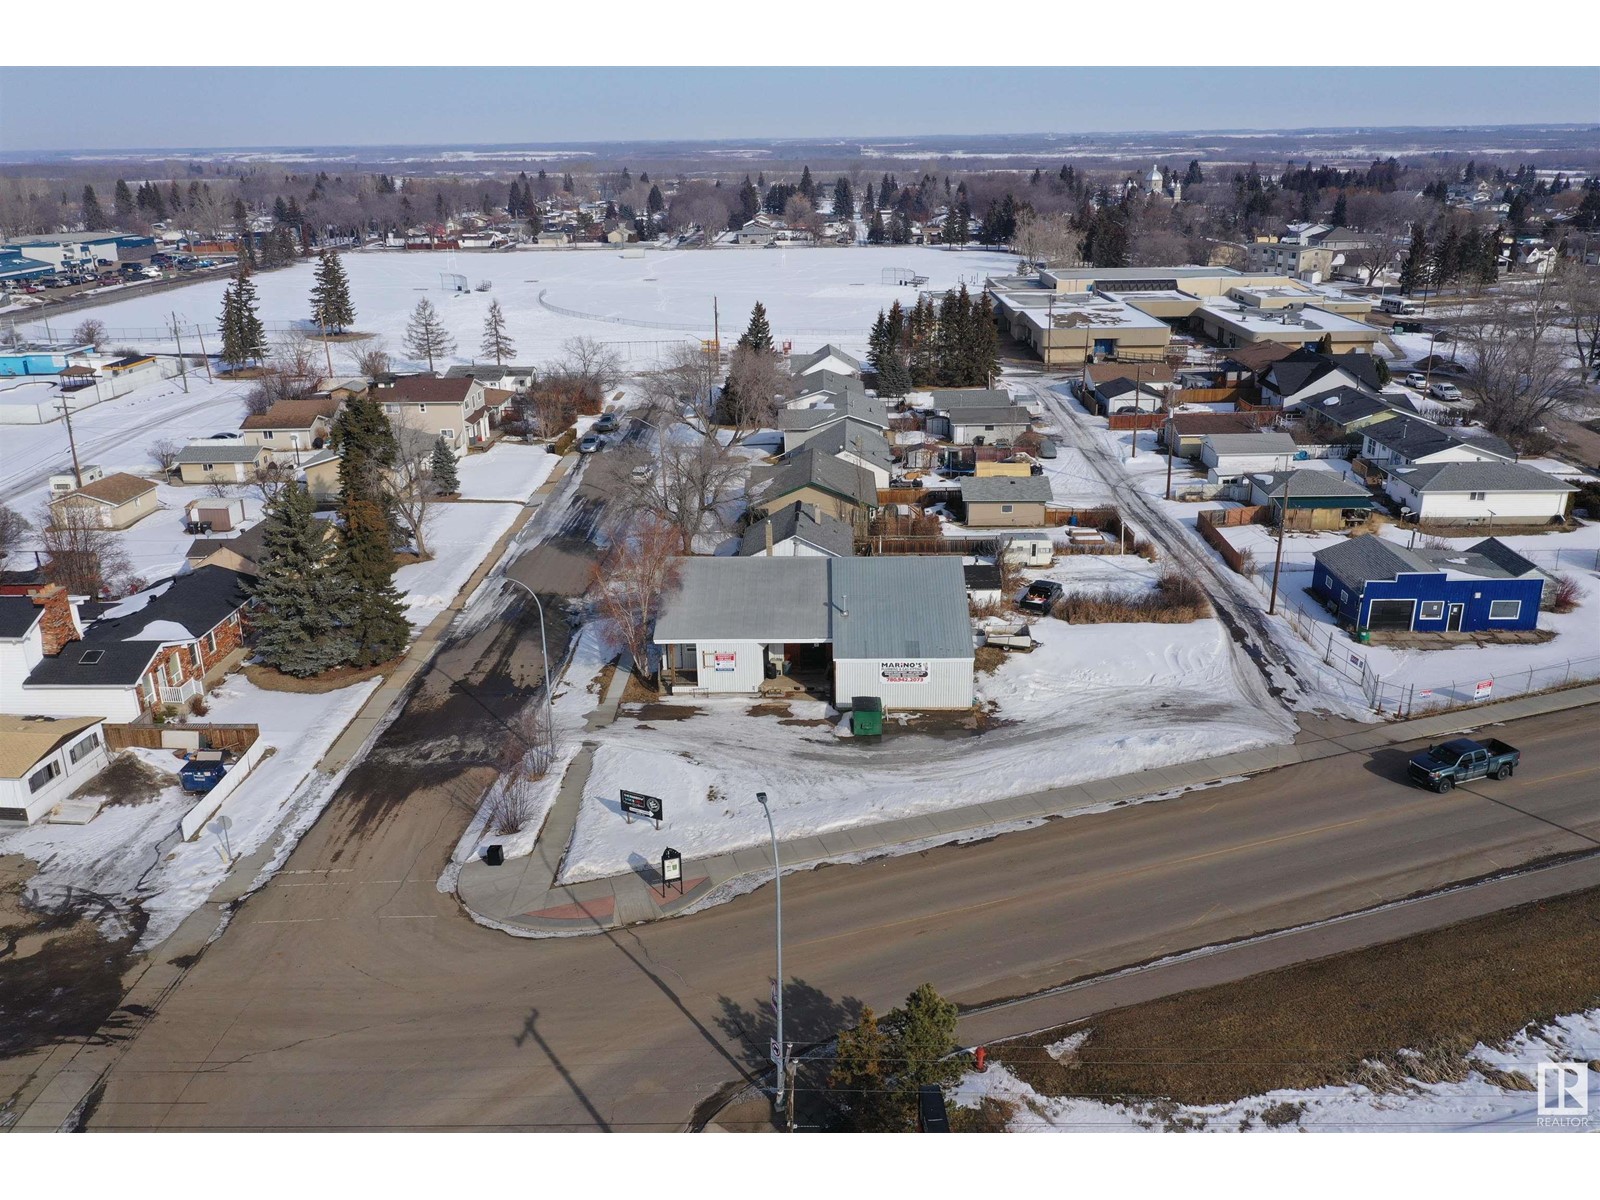 4807 52 ST located in Redwater, Alberta